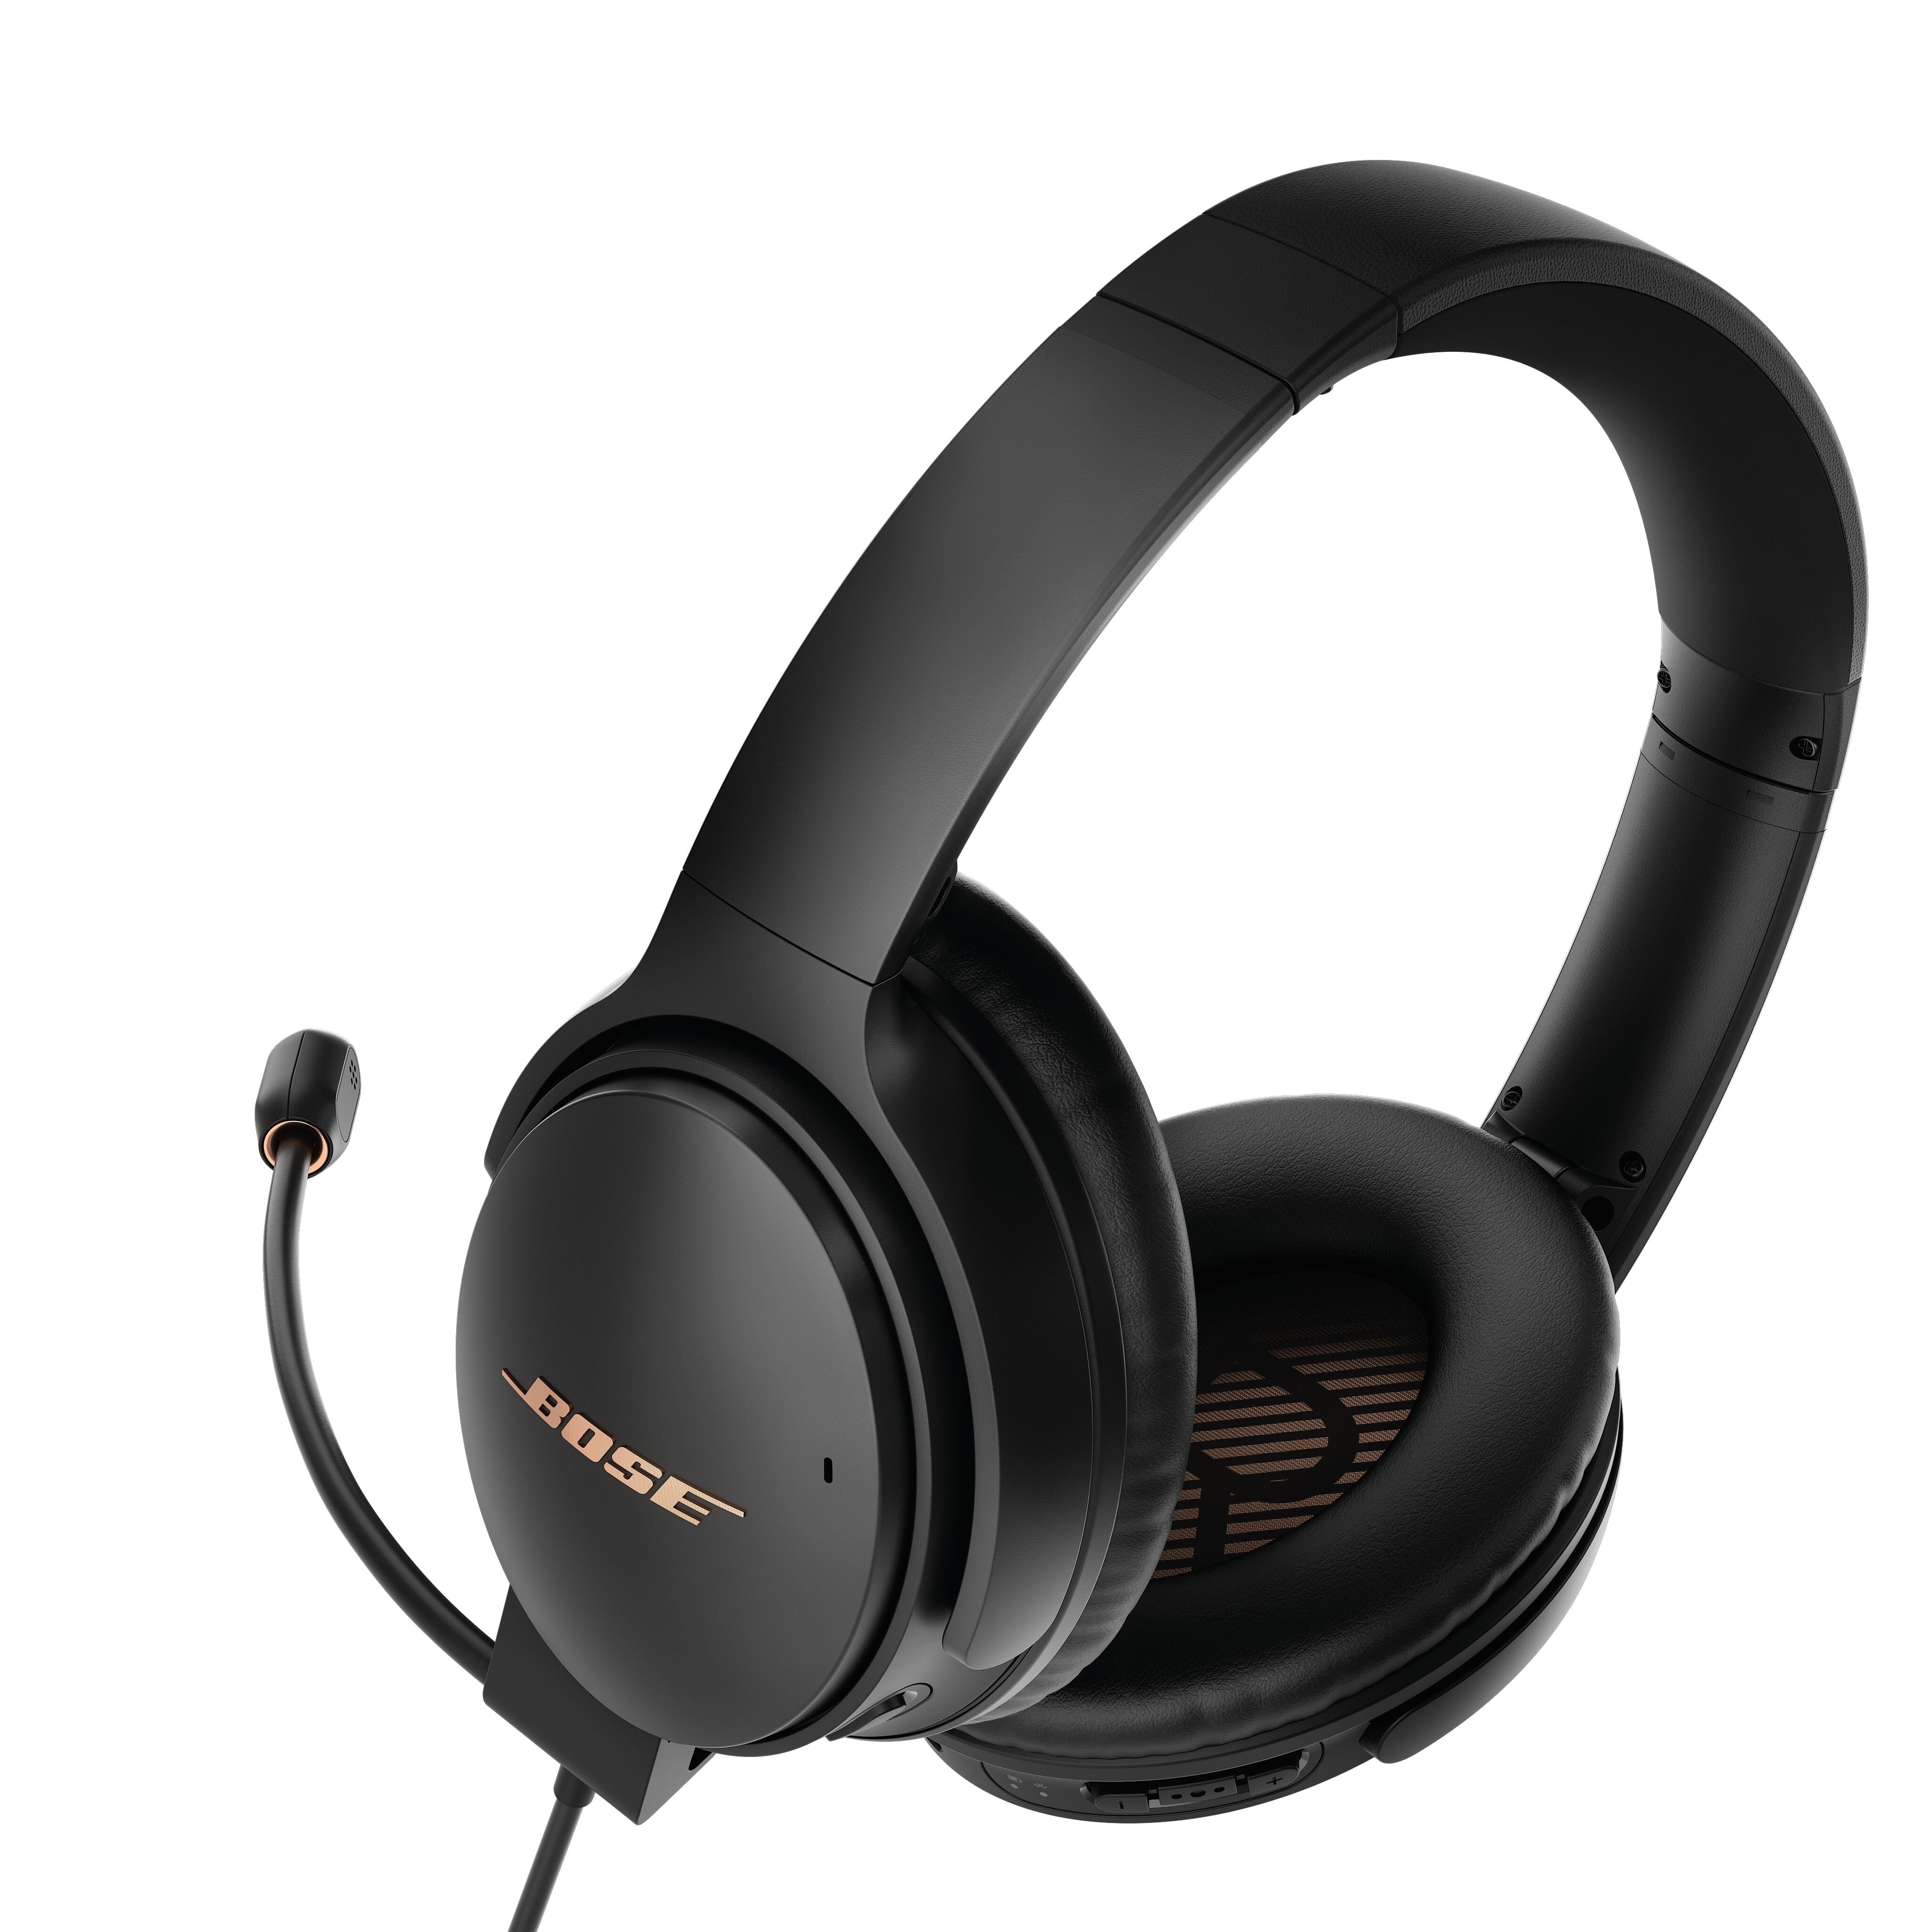 Bose QuietComfort 35 II Gaming Headset – Noise Cancelling 